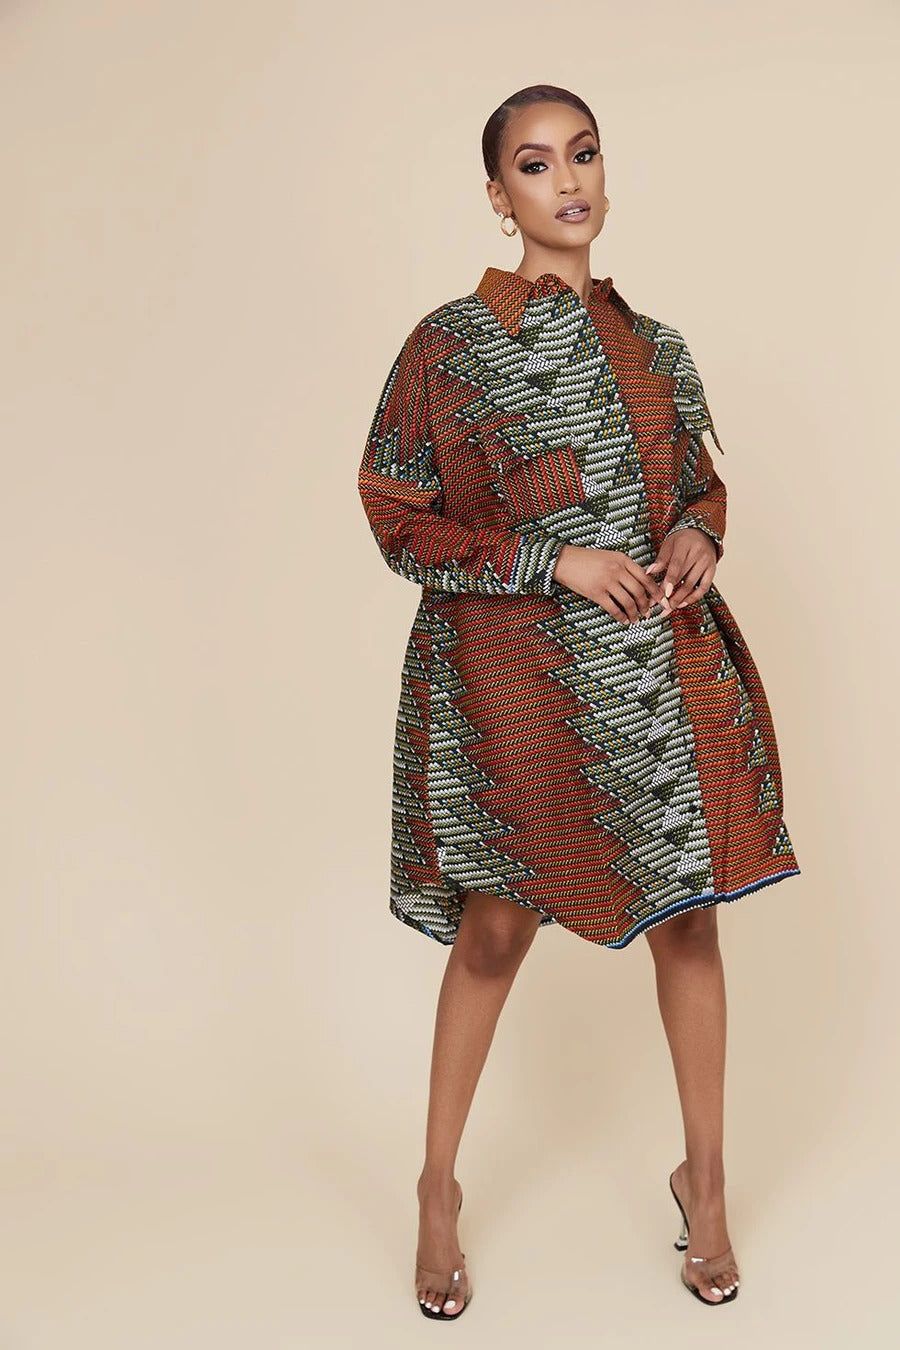 BROWN GOLD AFRICAN ANKARA PRINT PLUS SIZE FITTED FORMAL SHORT PARTY SHIRT DRESS